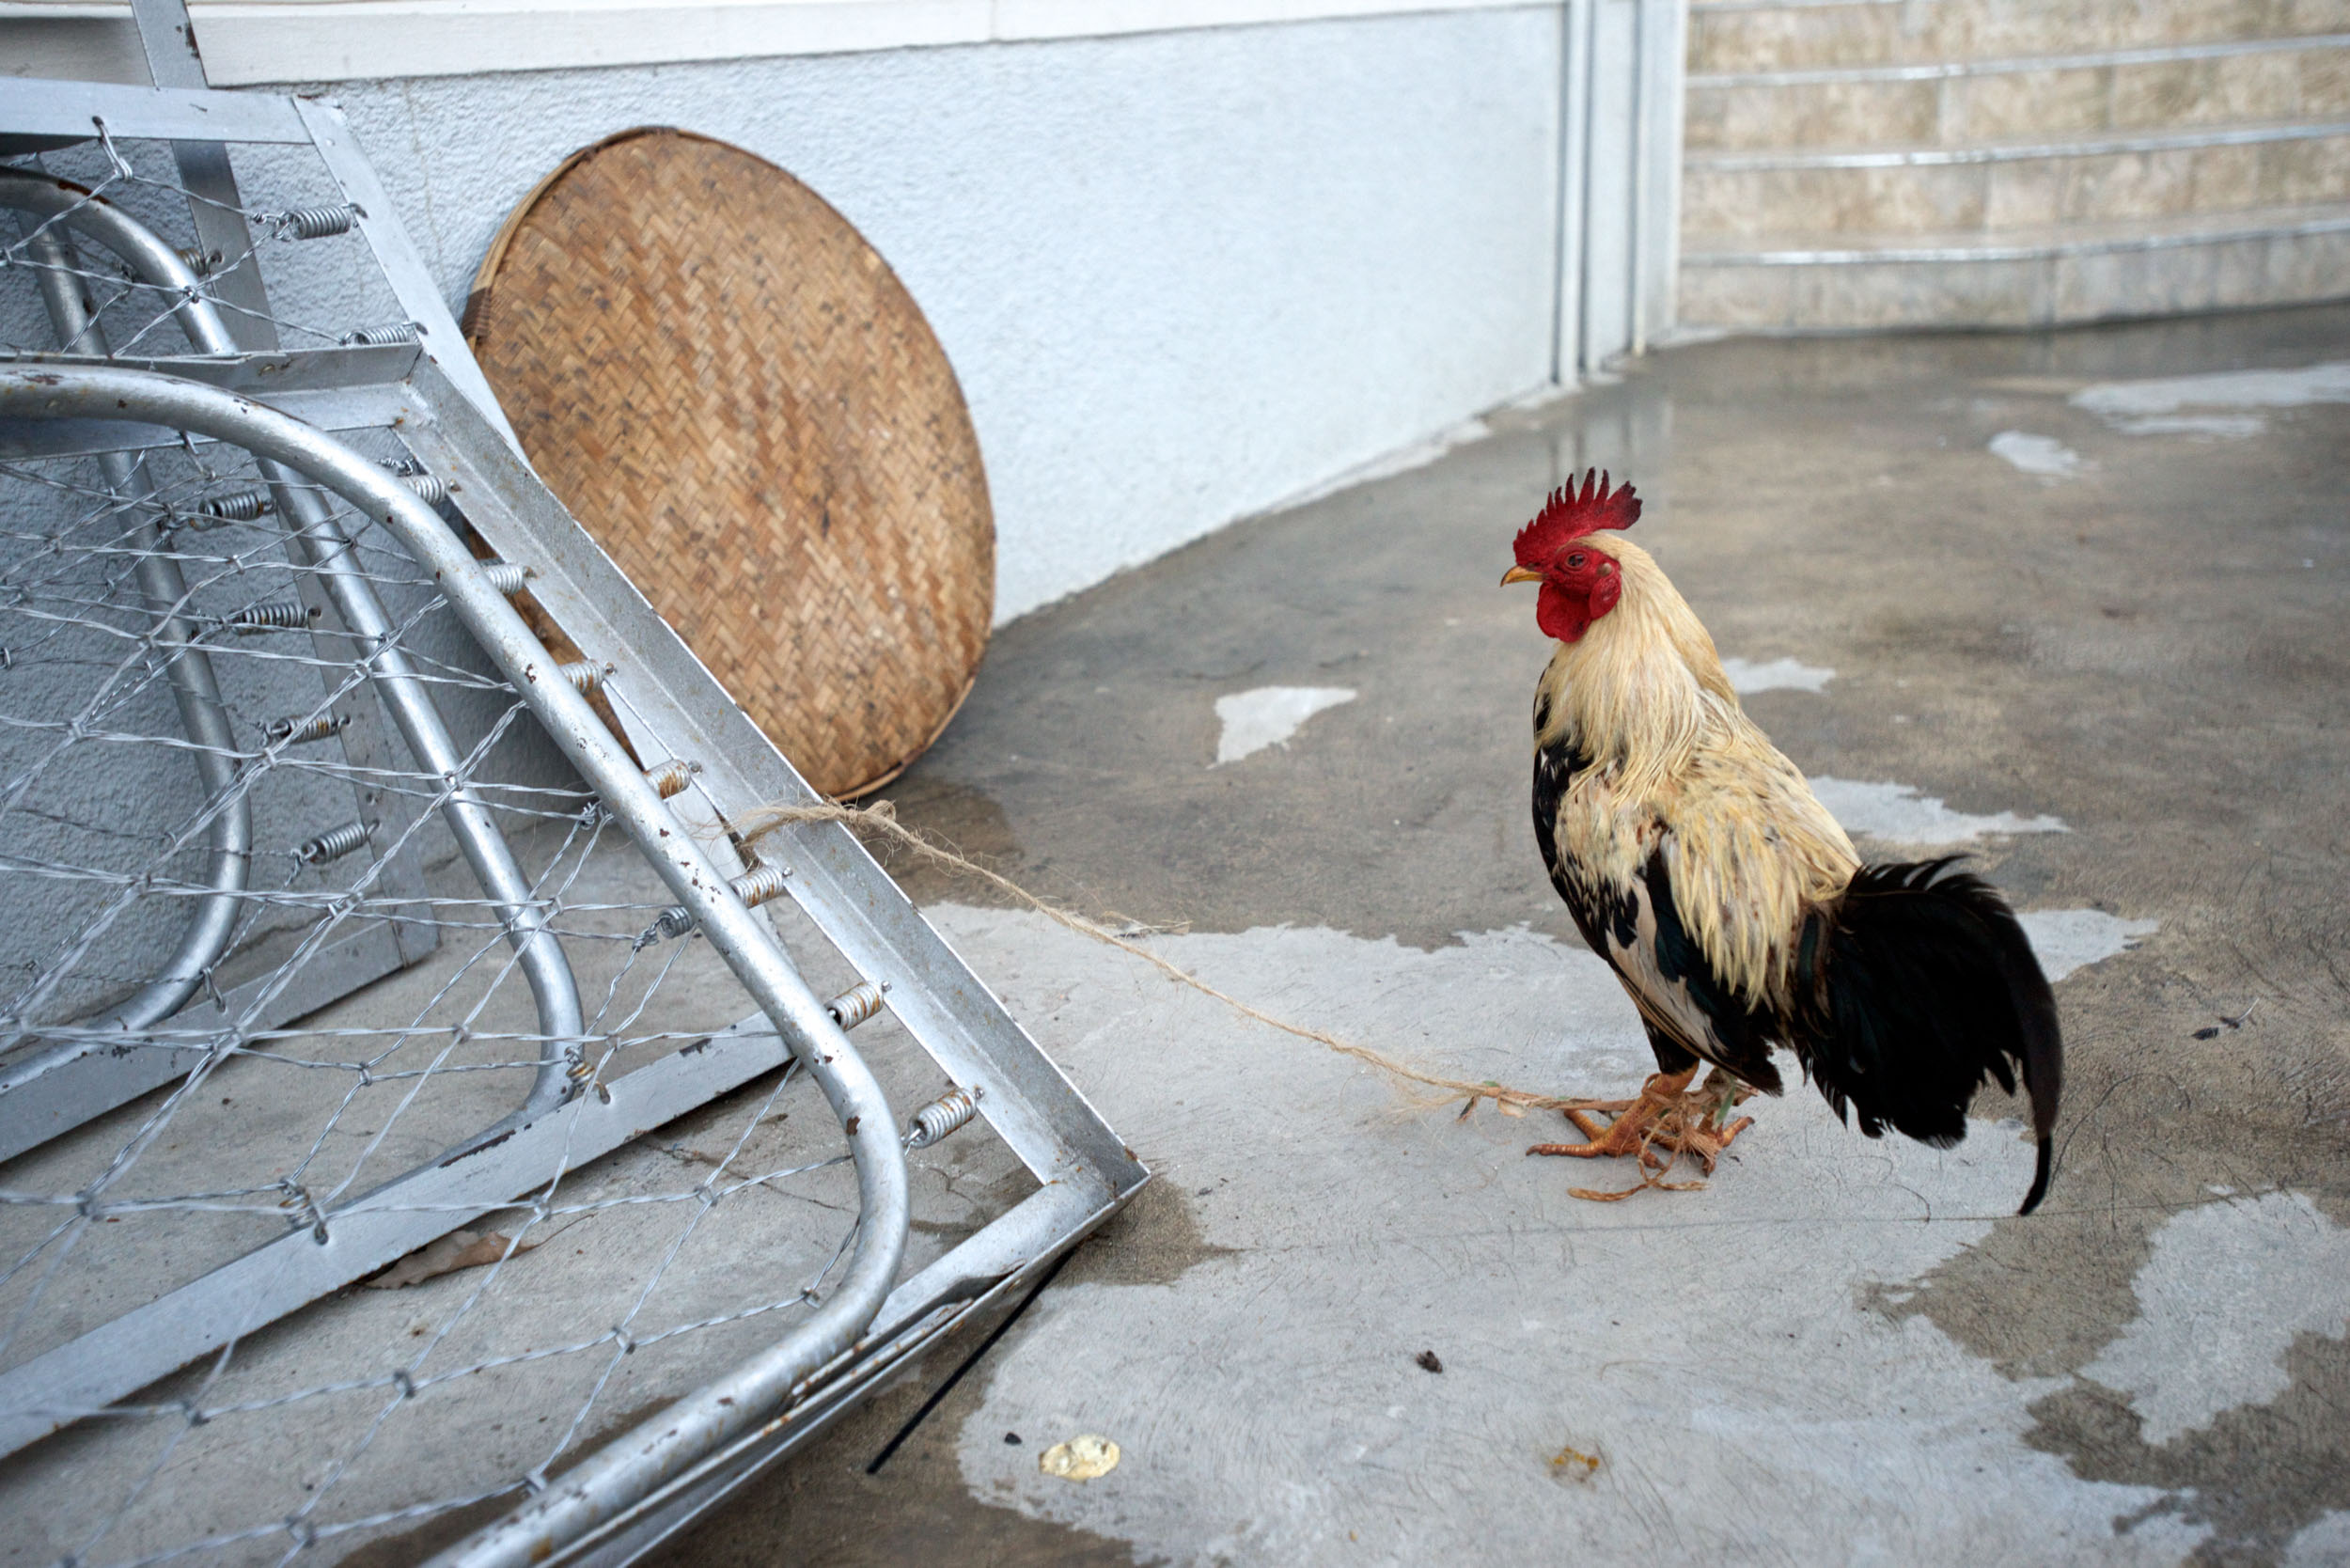 A chicken stands tethered to a table in Port au Prince, Haiti.